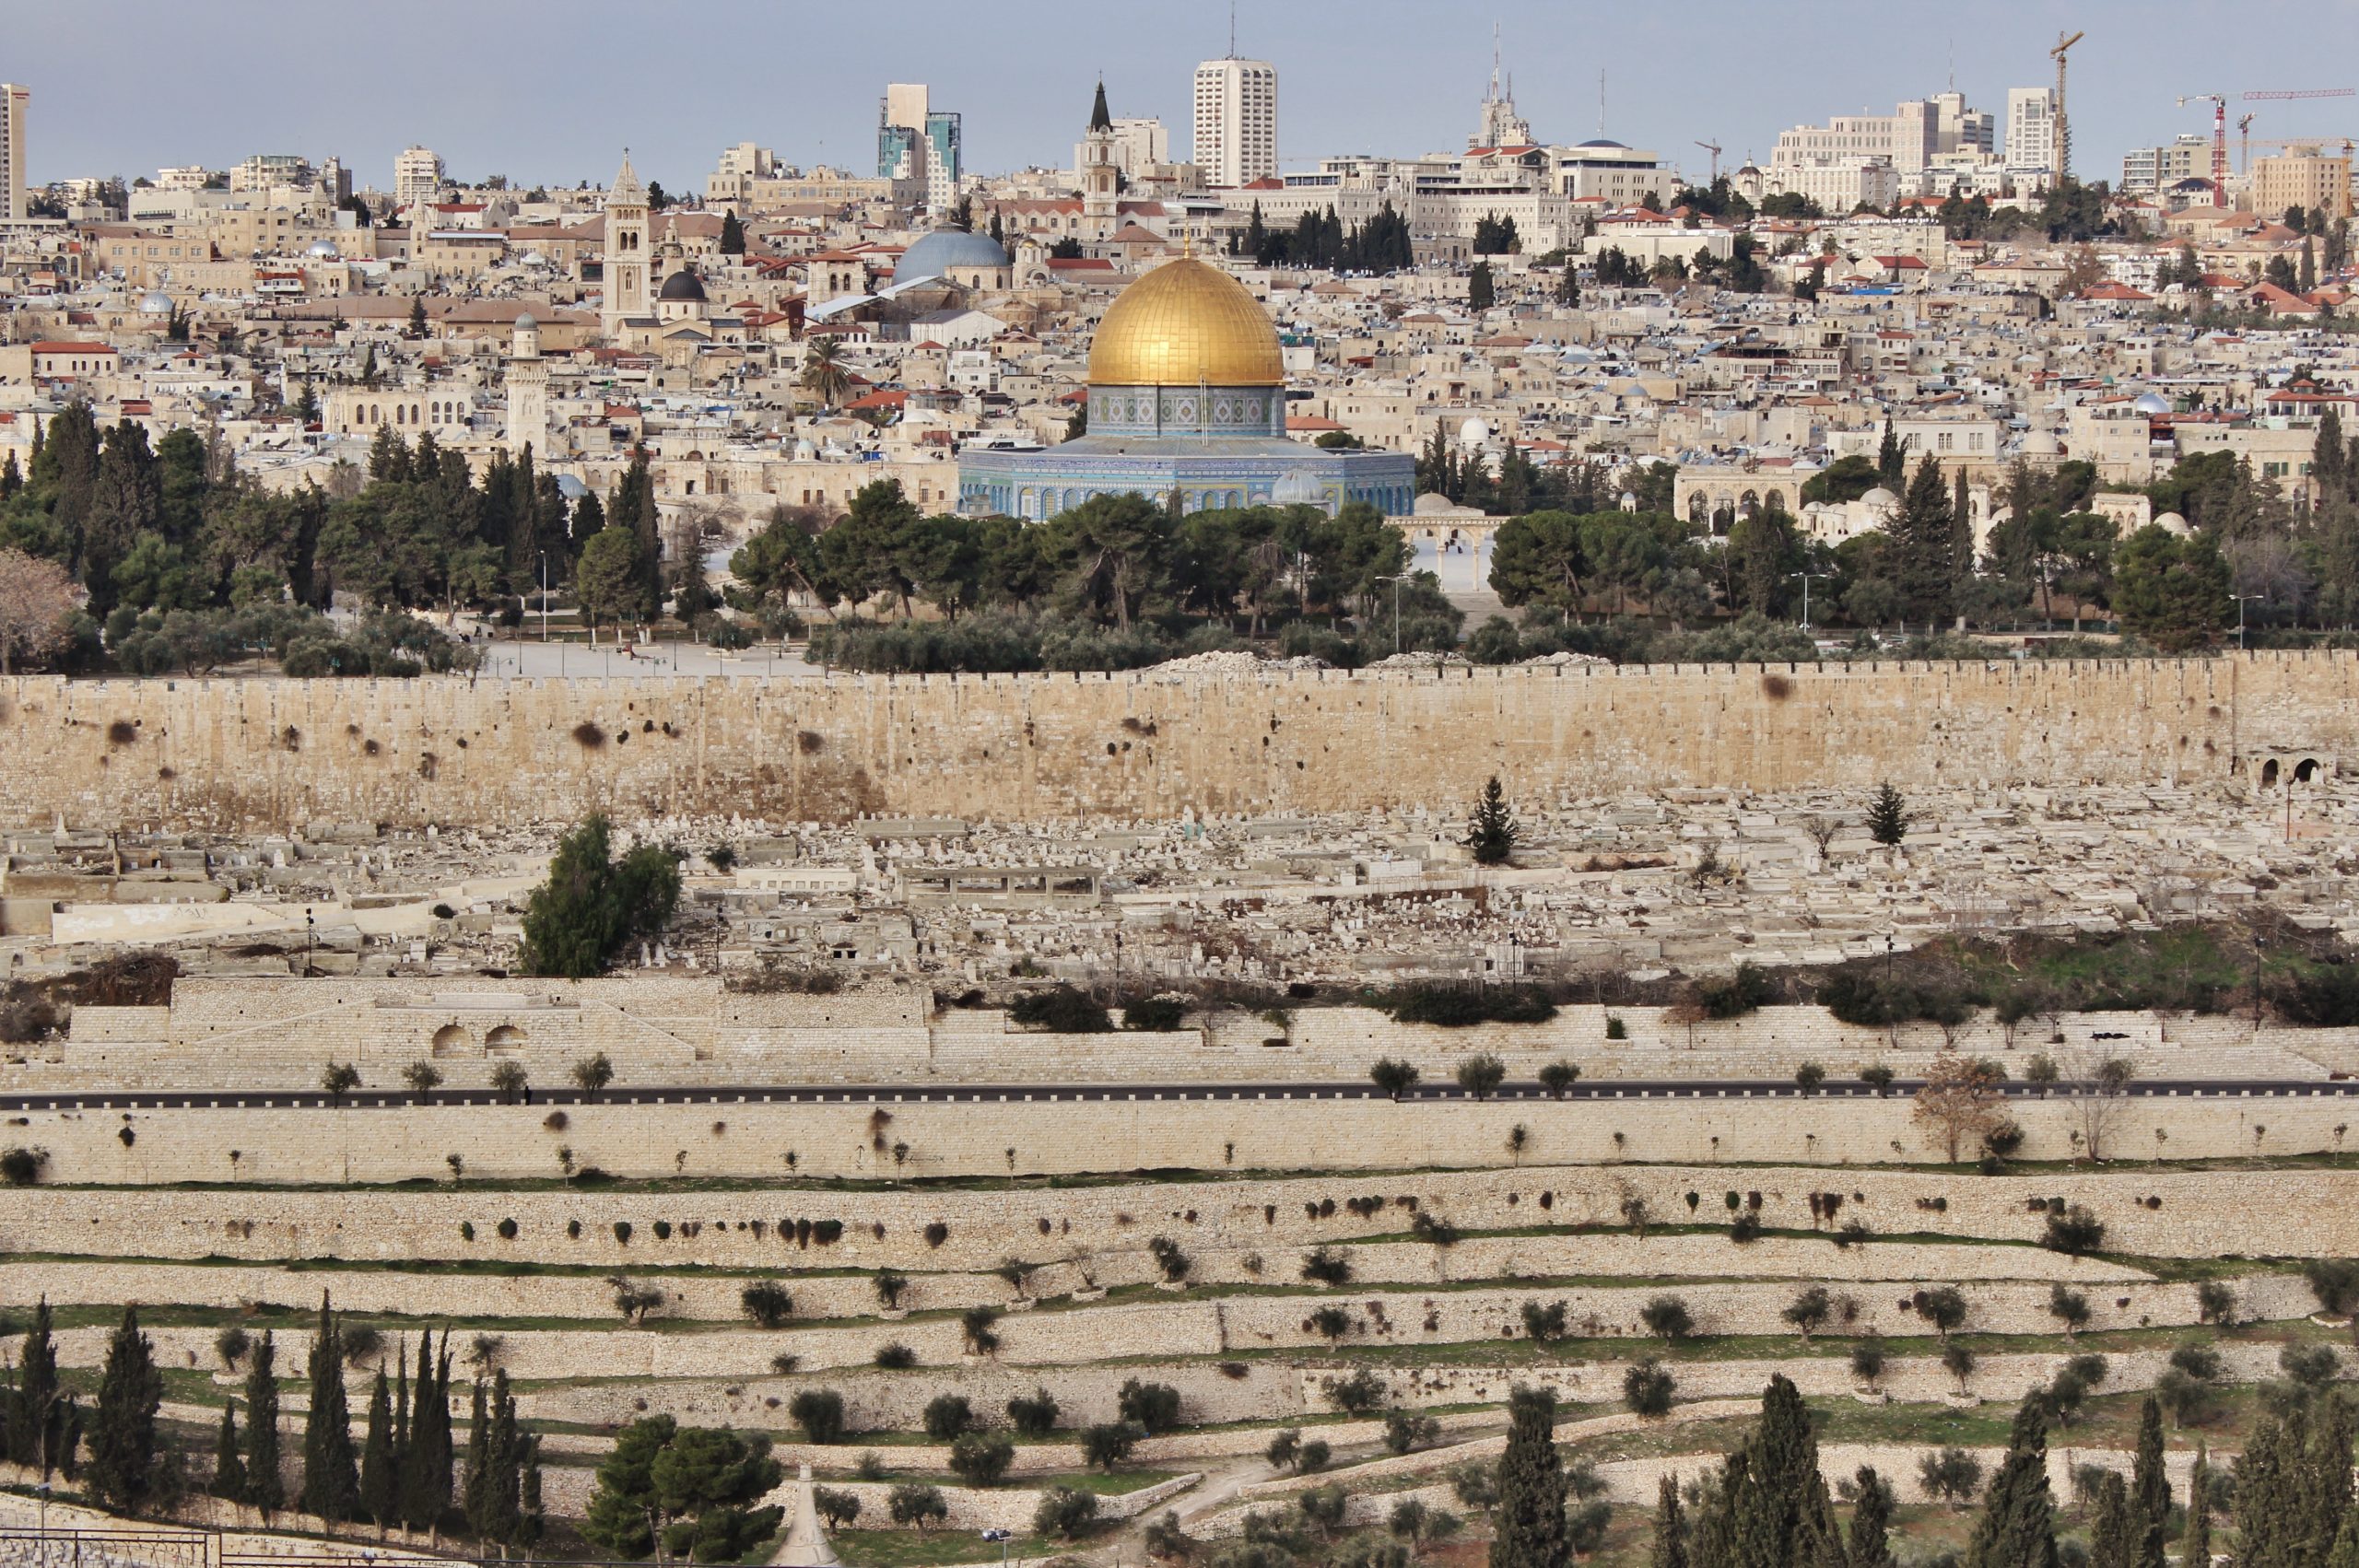 A Short one: On Jerusalem in the eye of Christianity